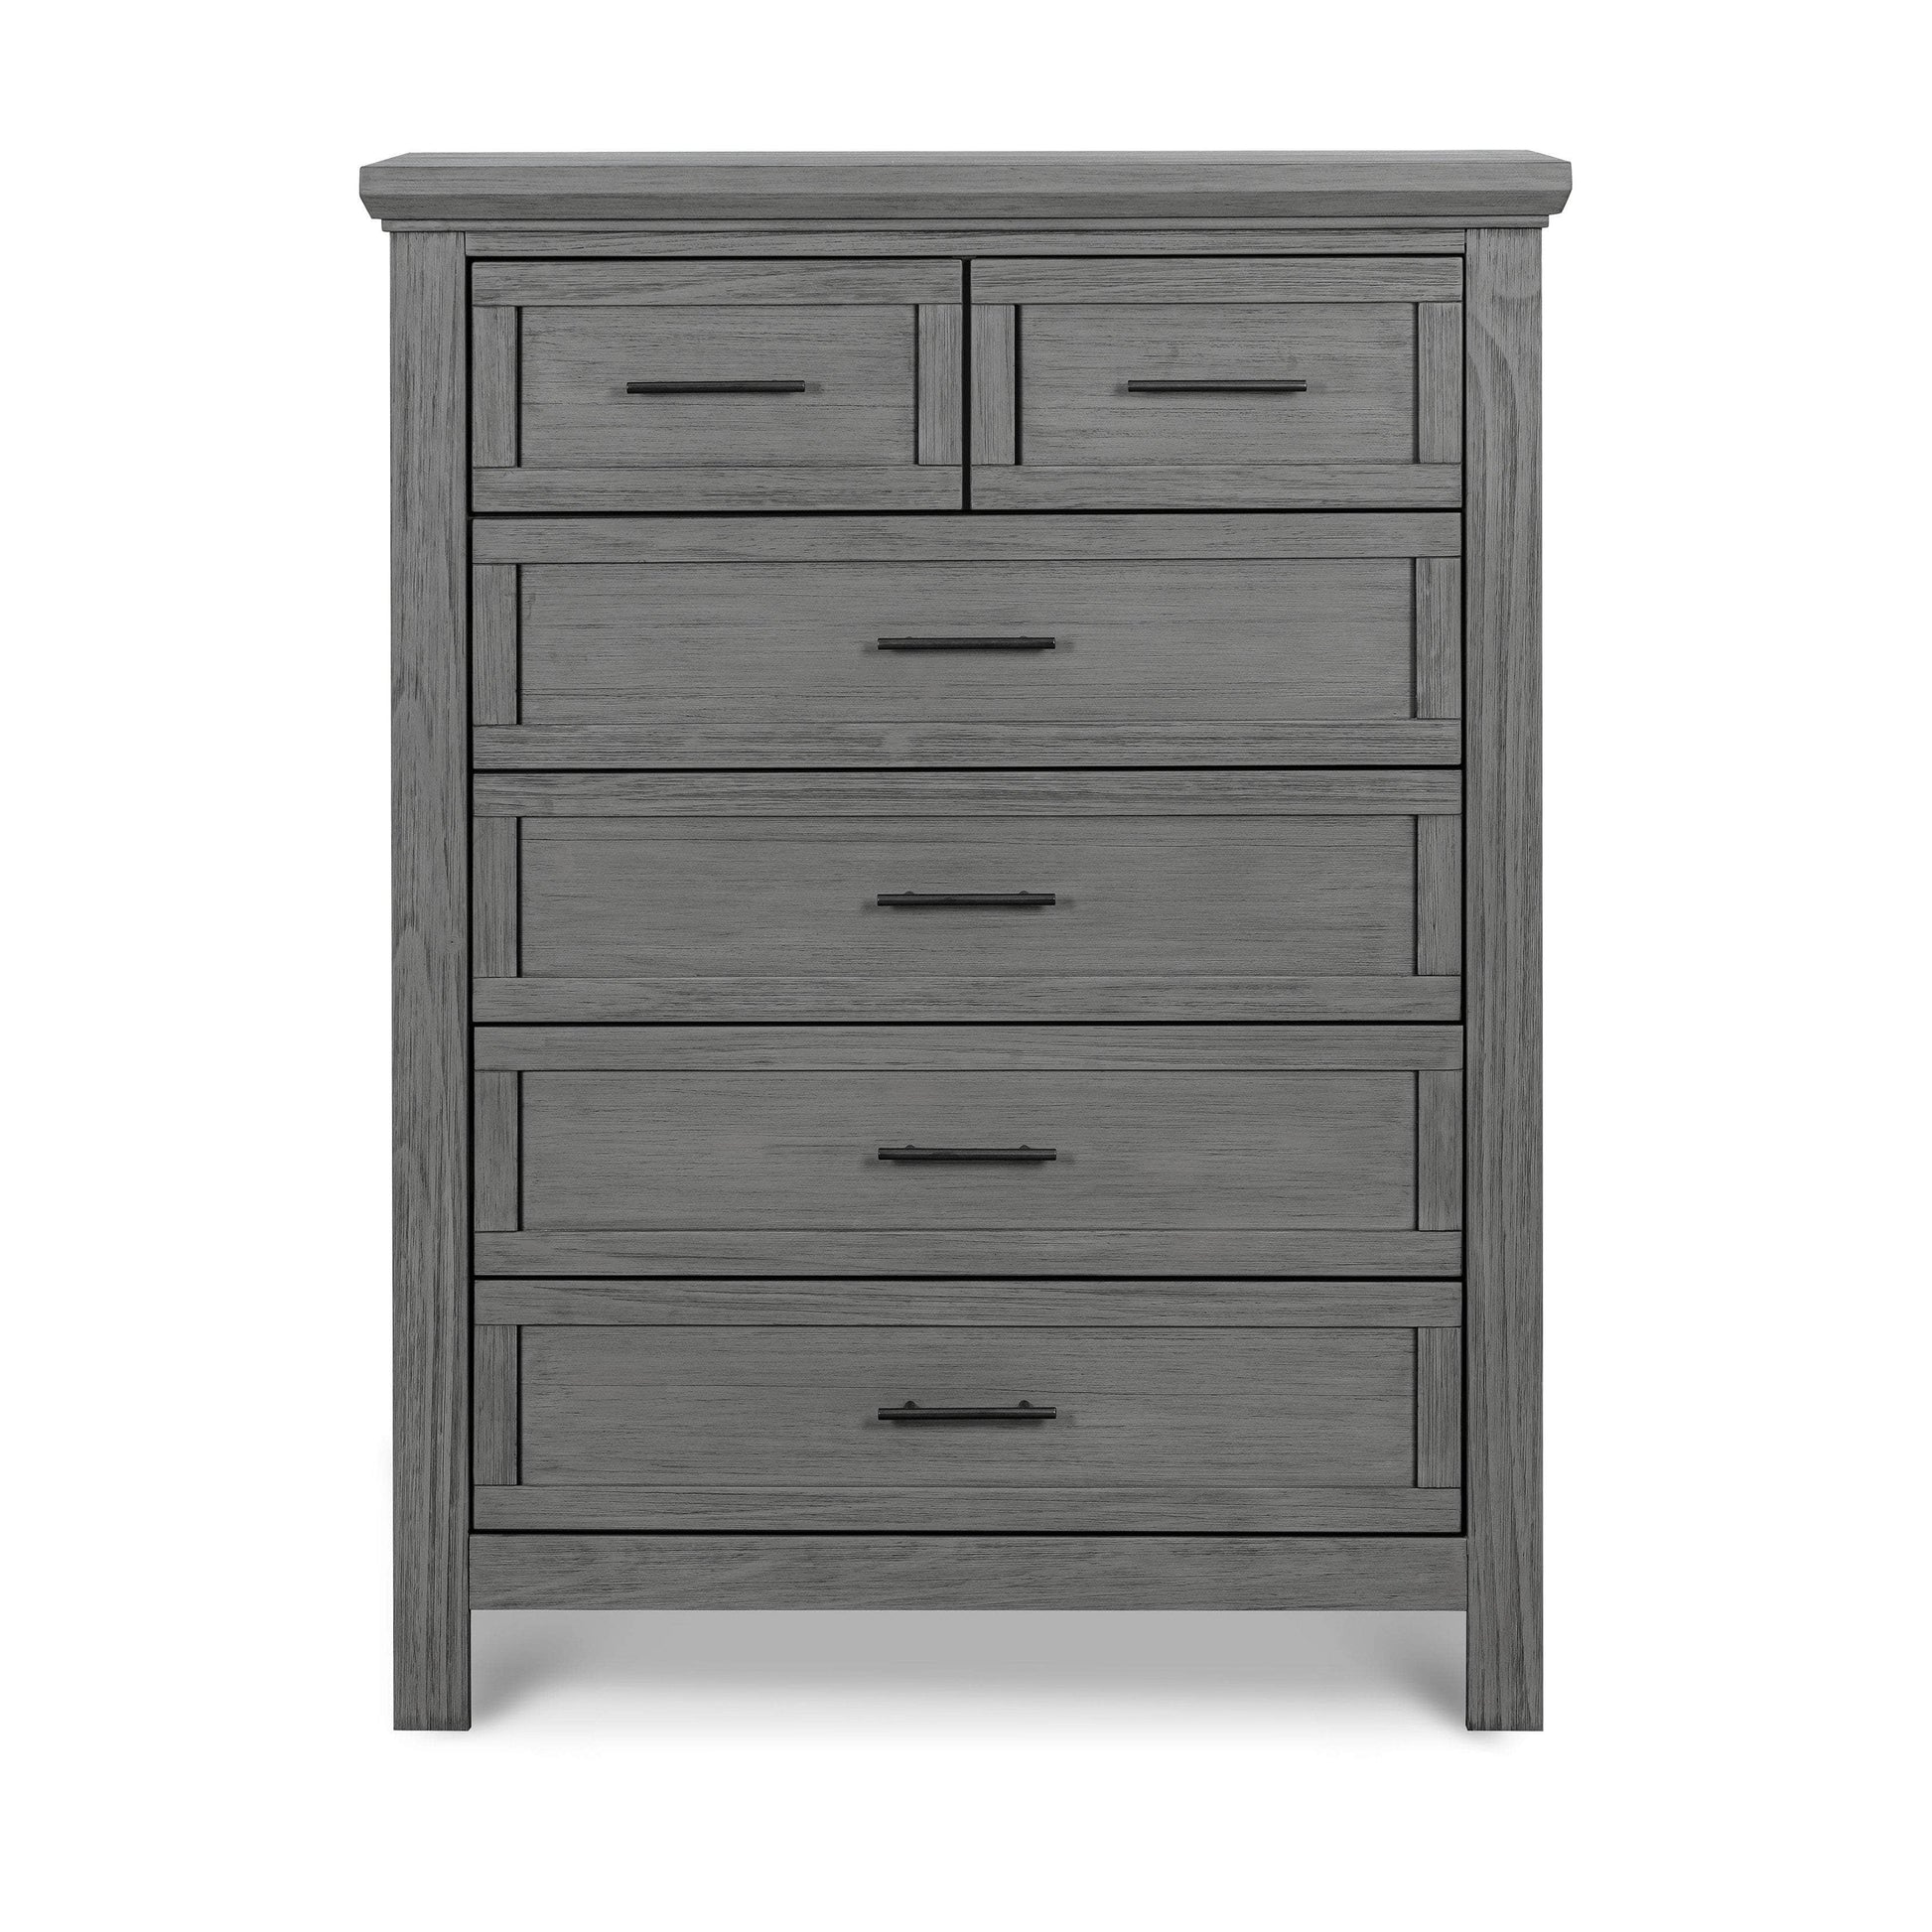 B14525WC,Emory Farmhouse 6-Drawer Chest in Weathered Charcoal